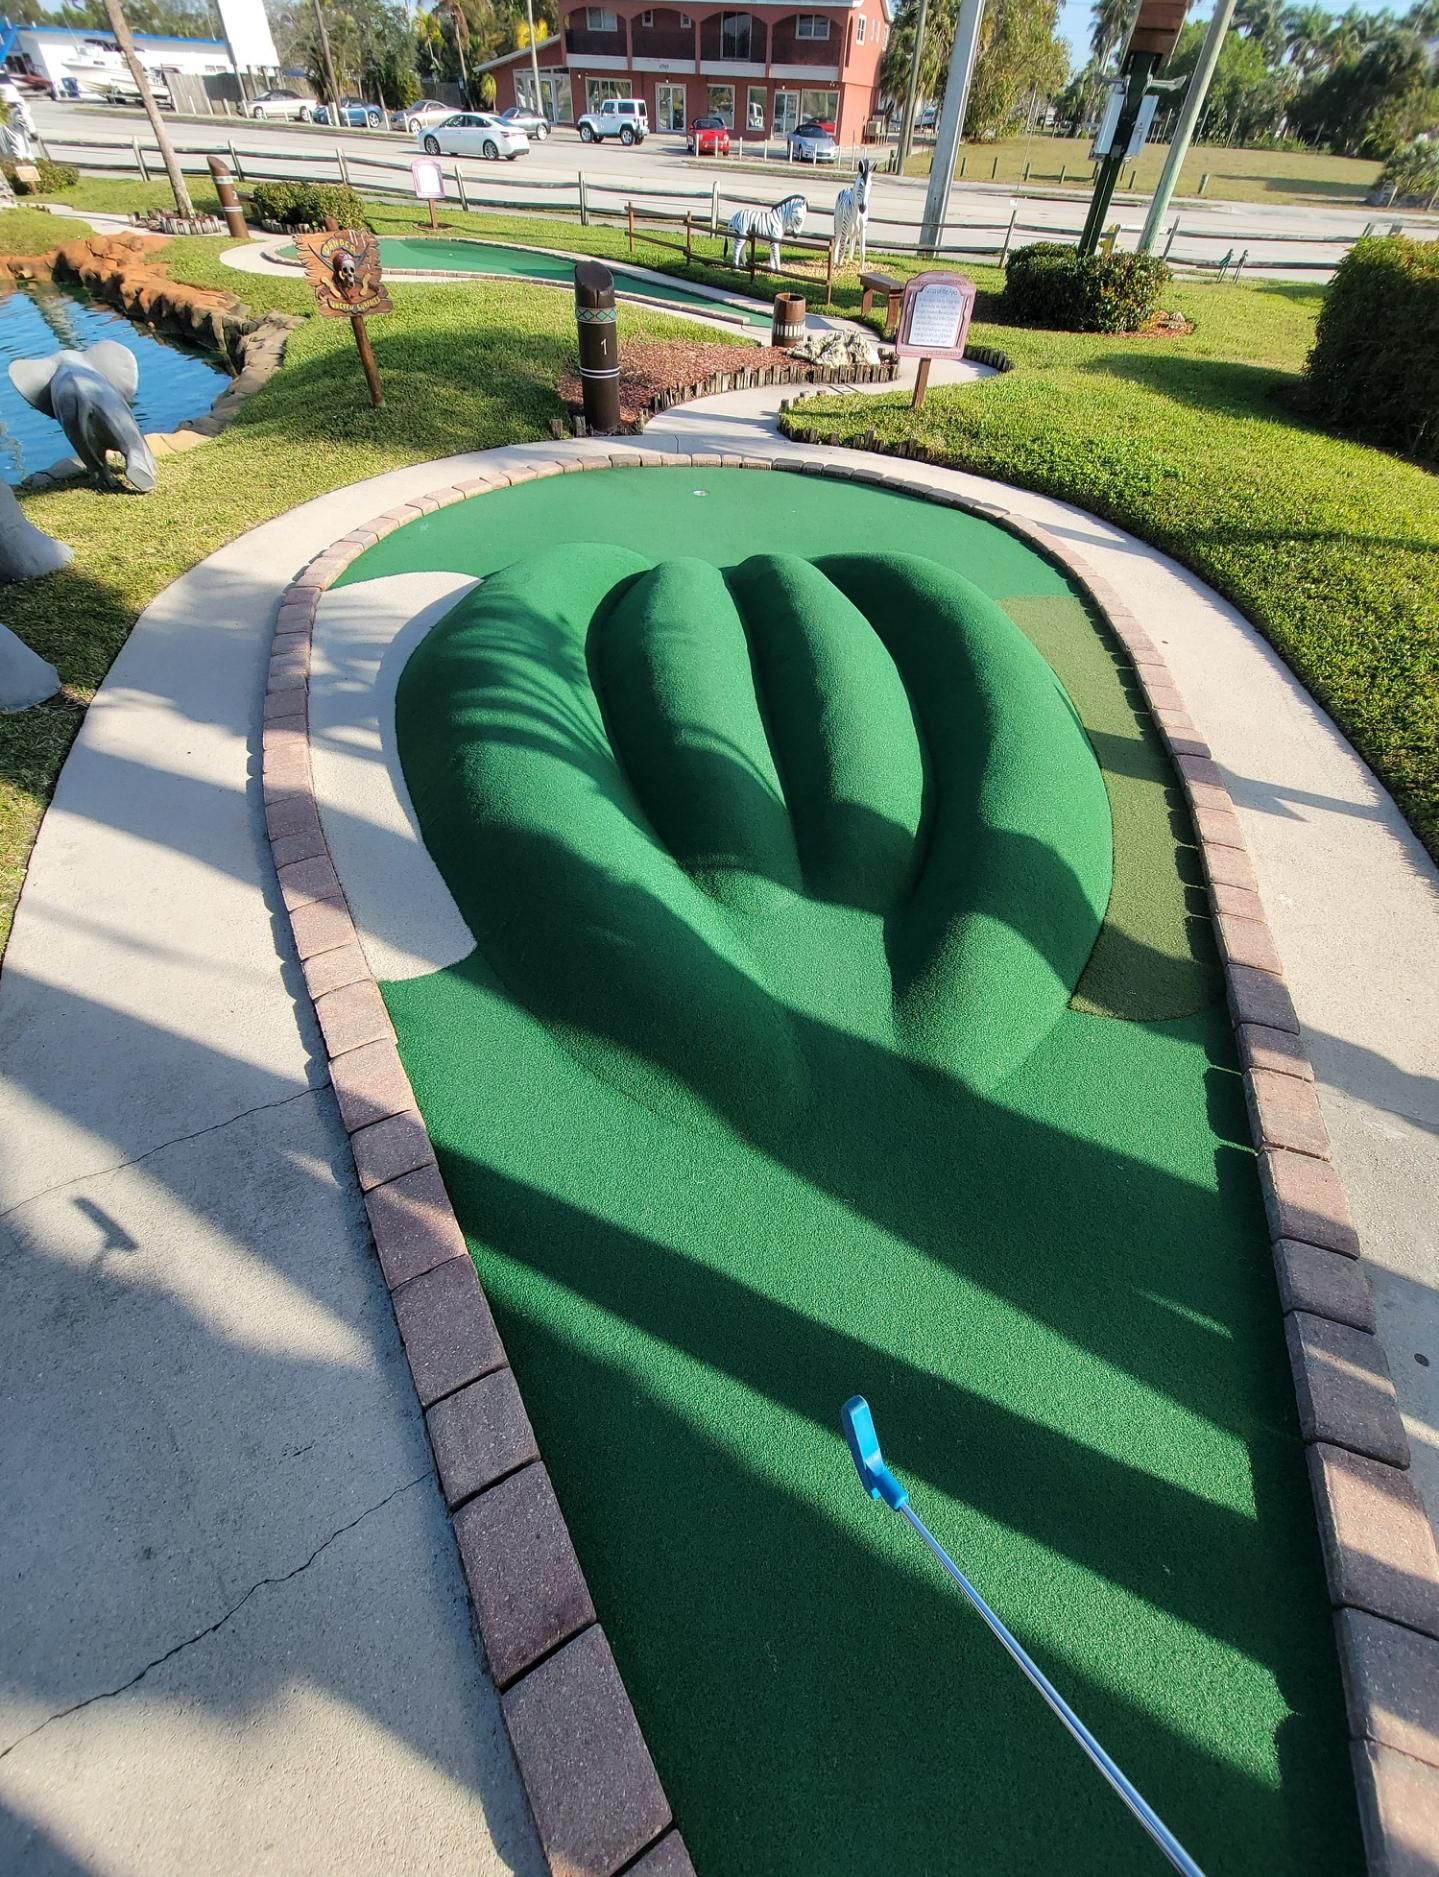 What kind of miniature golf hole is this?